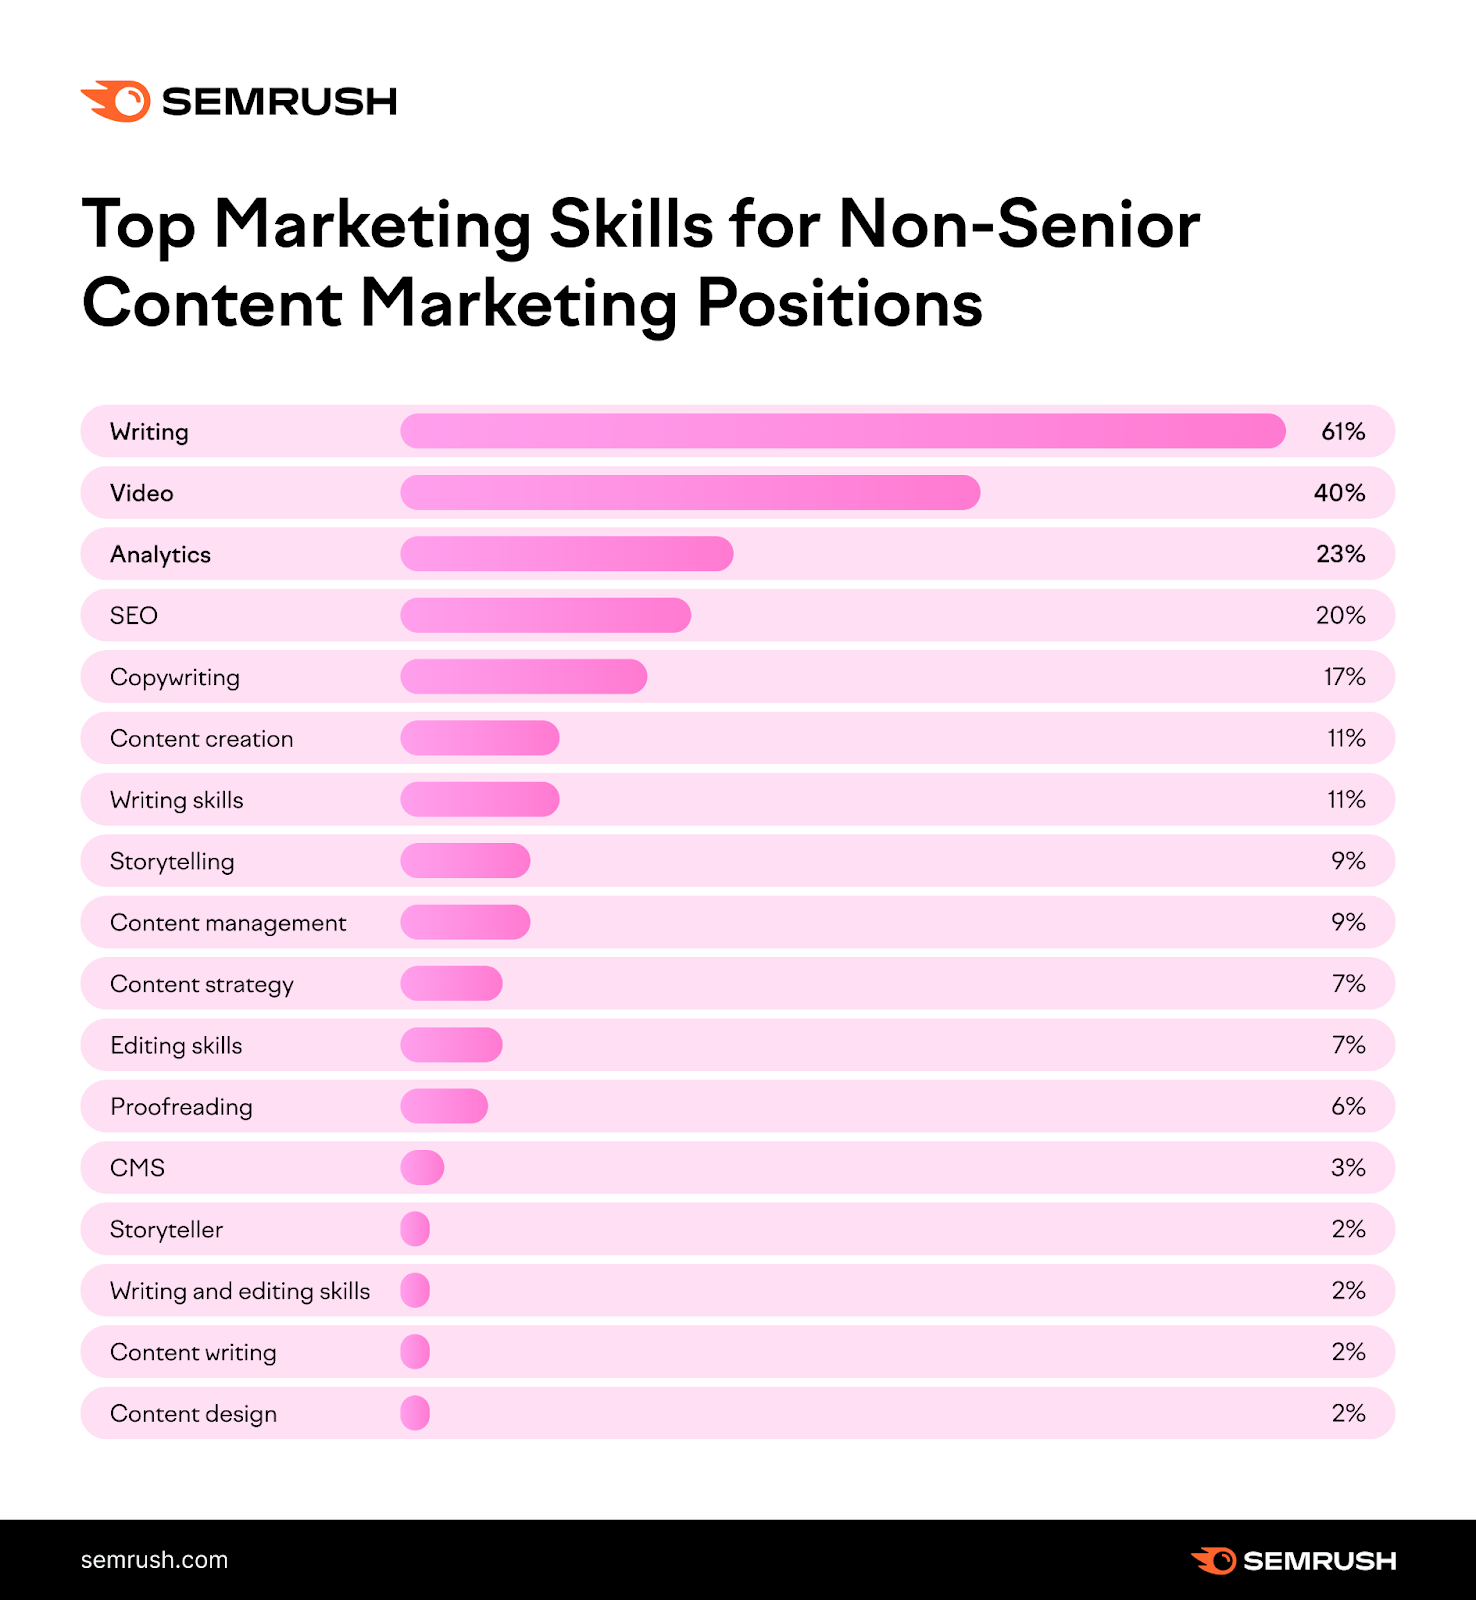 Top marketing skills for non senior content marketing positions: Writing, Video, Analytics, SEO and Copywriting, and more